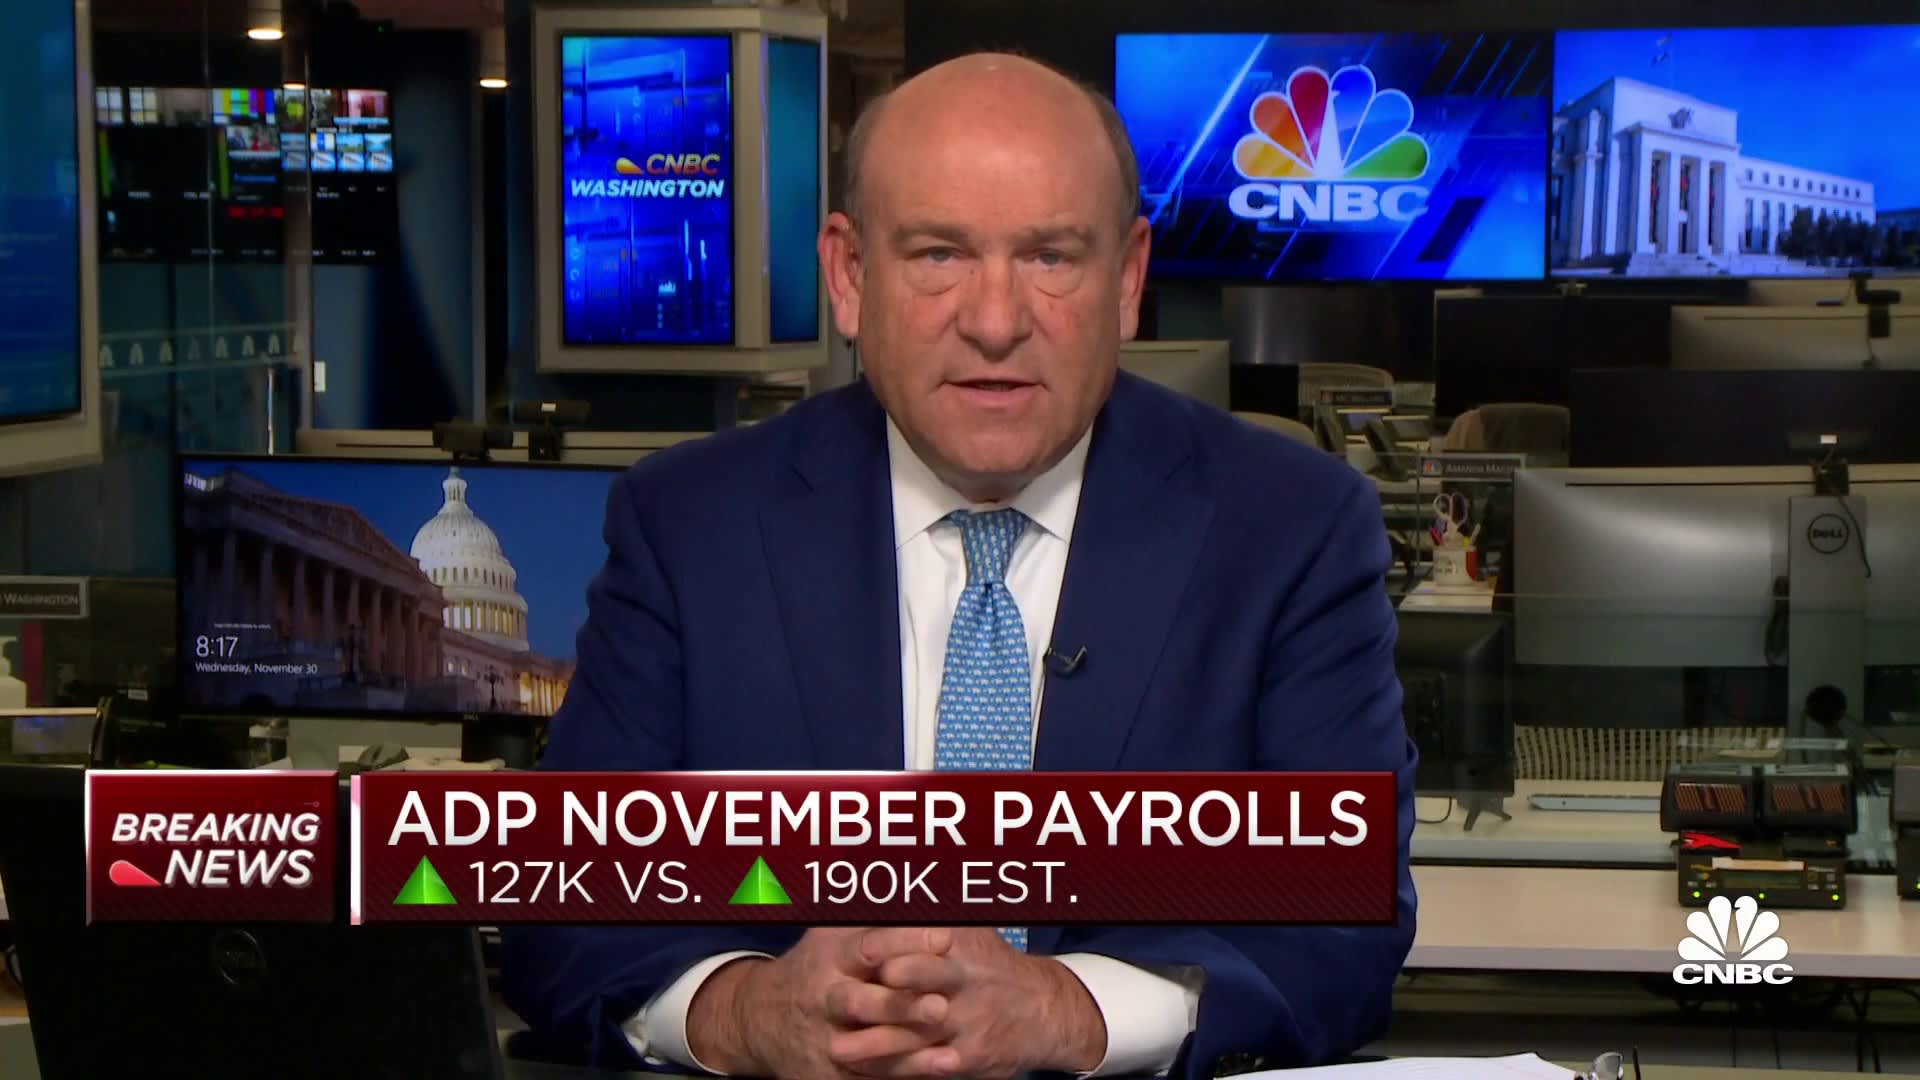 Private payrolls climbed by only 127,000 in November, far below estimates: ADP